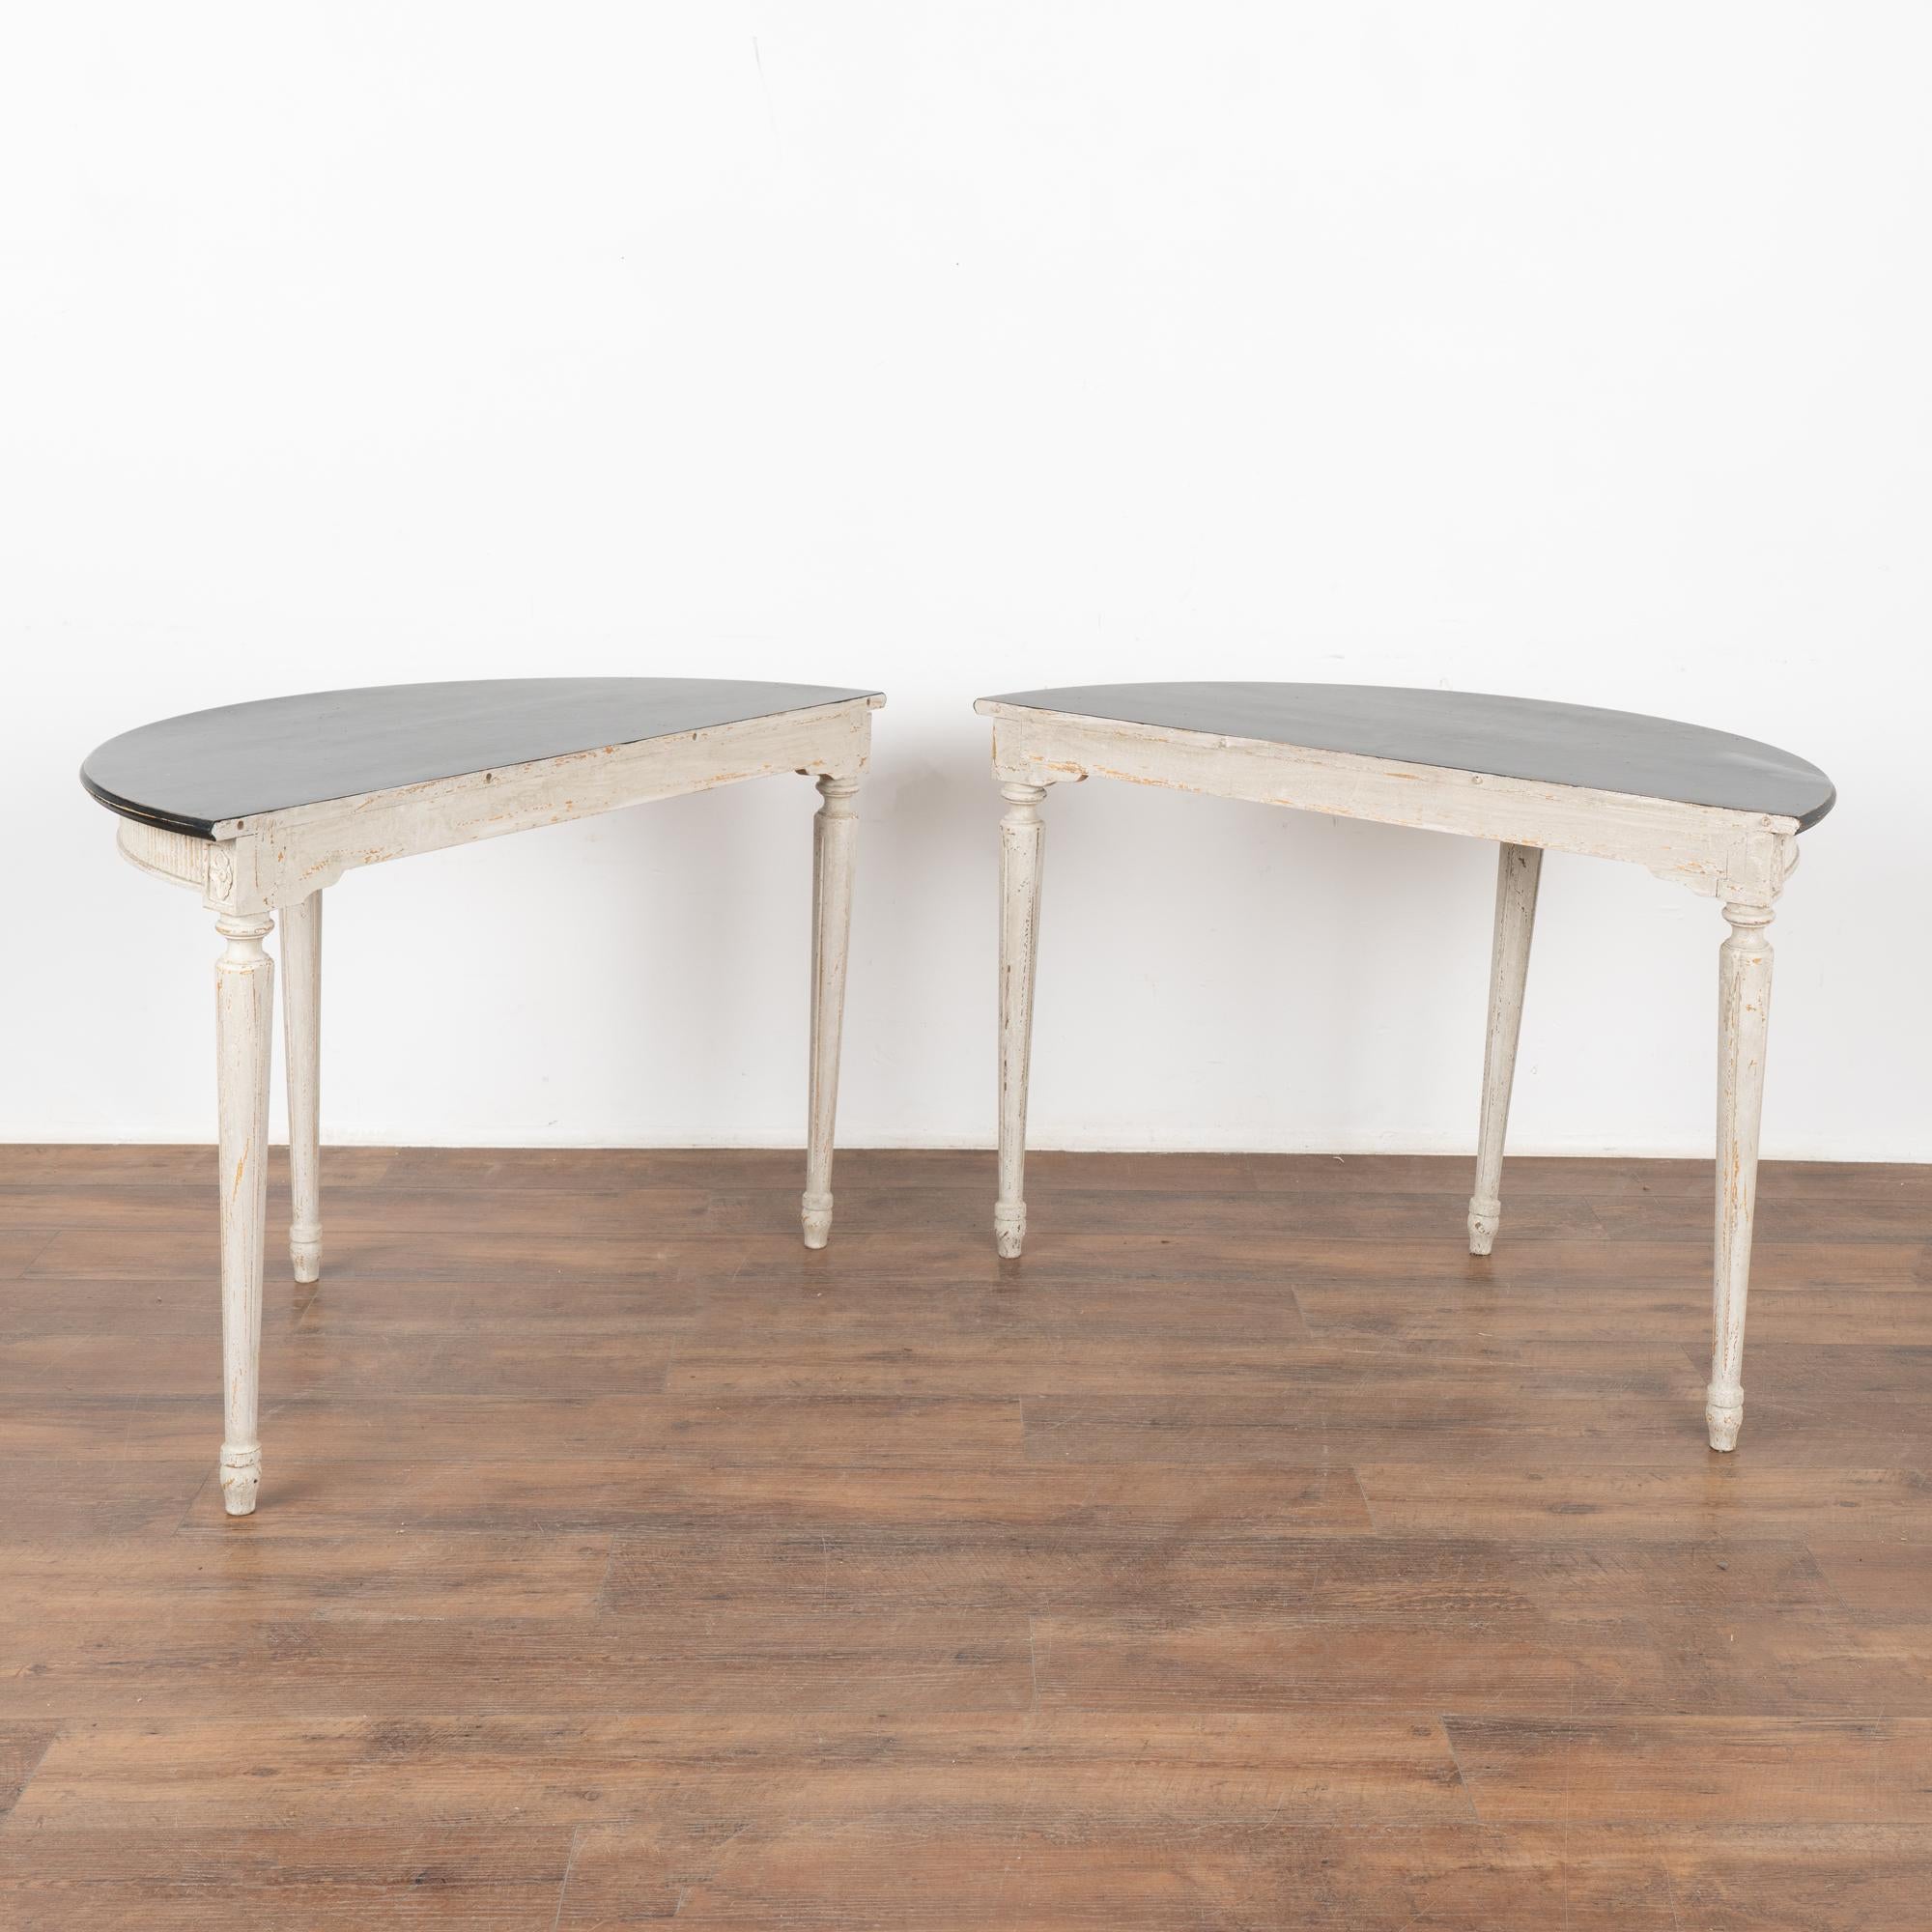 Pair Swedish Gustavian Demilune White & Black Side Tables Consoles circa 1870-90 For Sale 8